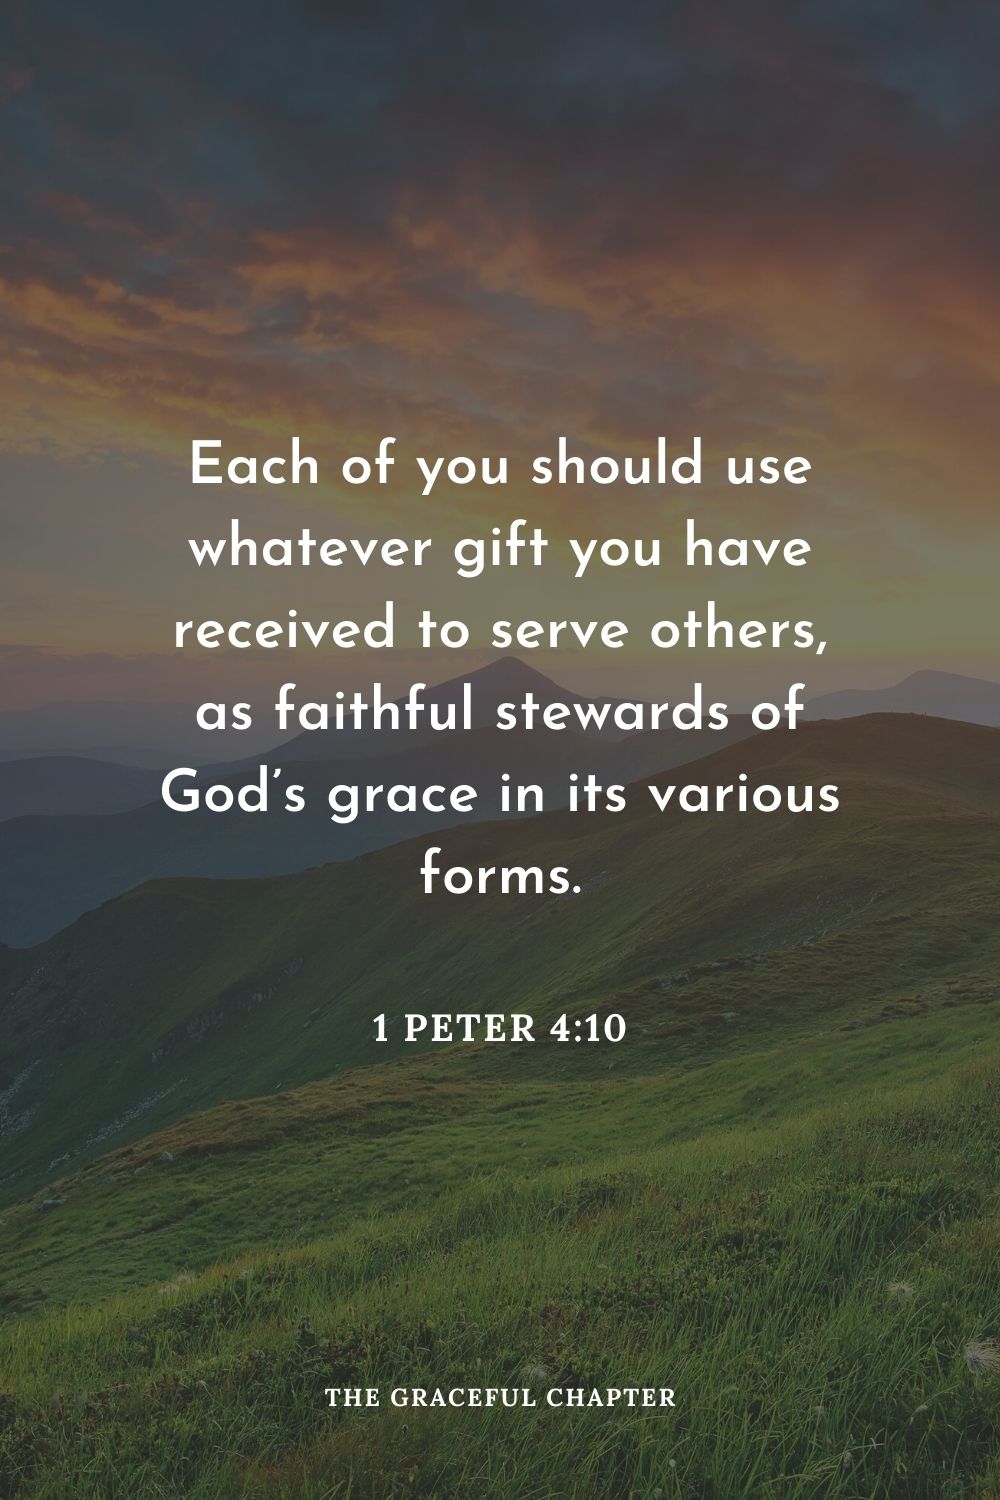 Each of you should use whatever gift you have received to serve others, as faithful stewards of God’s grace in its various forms.